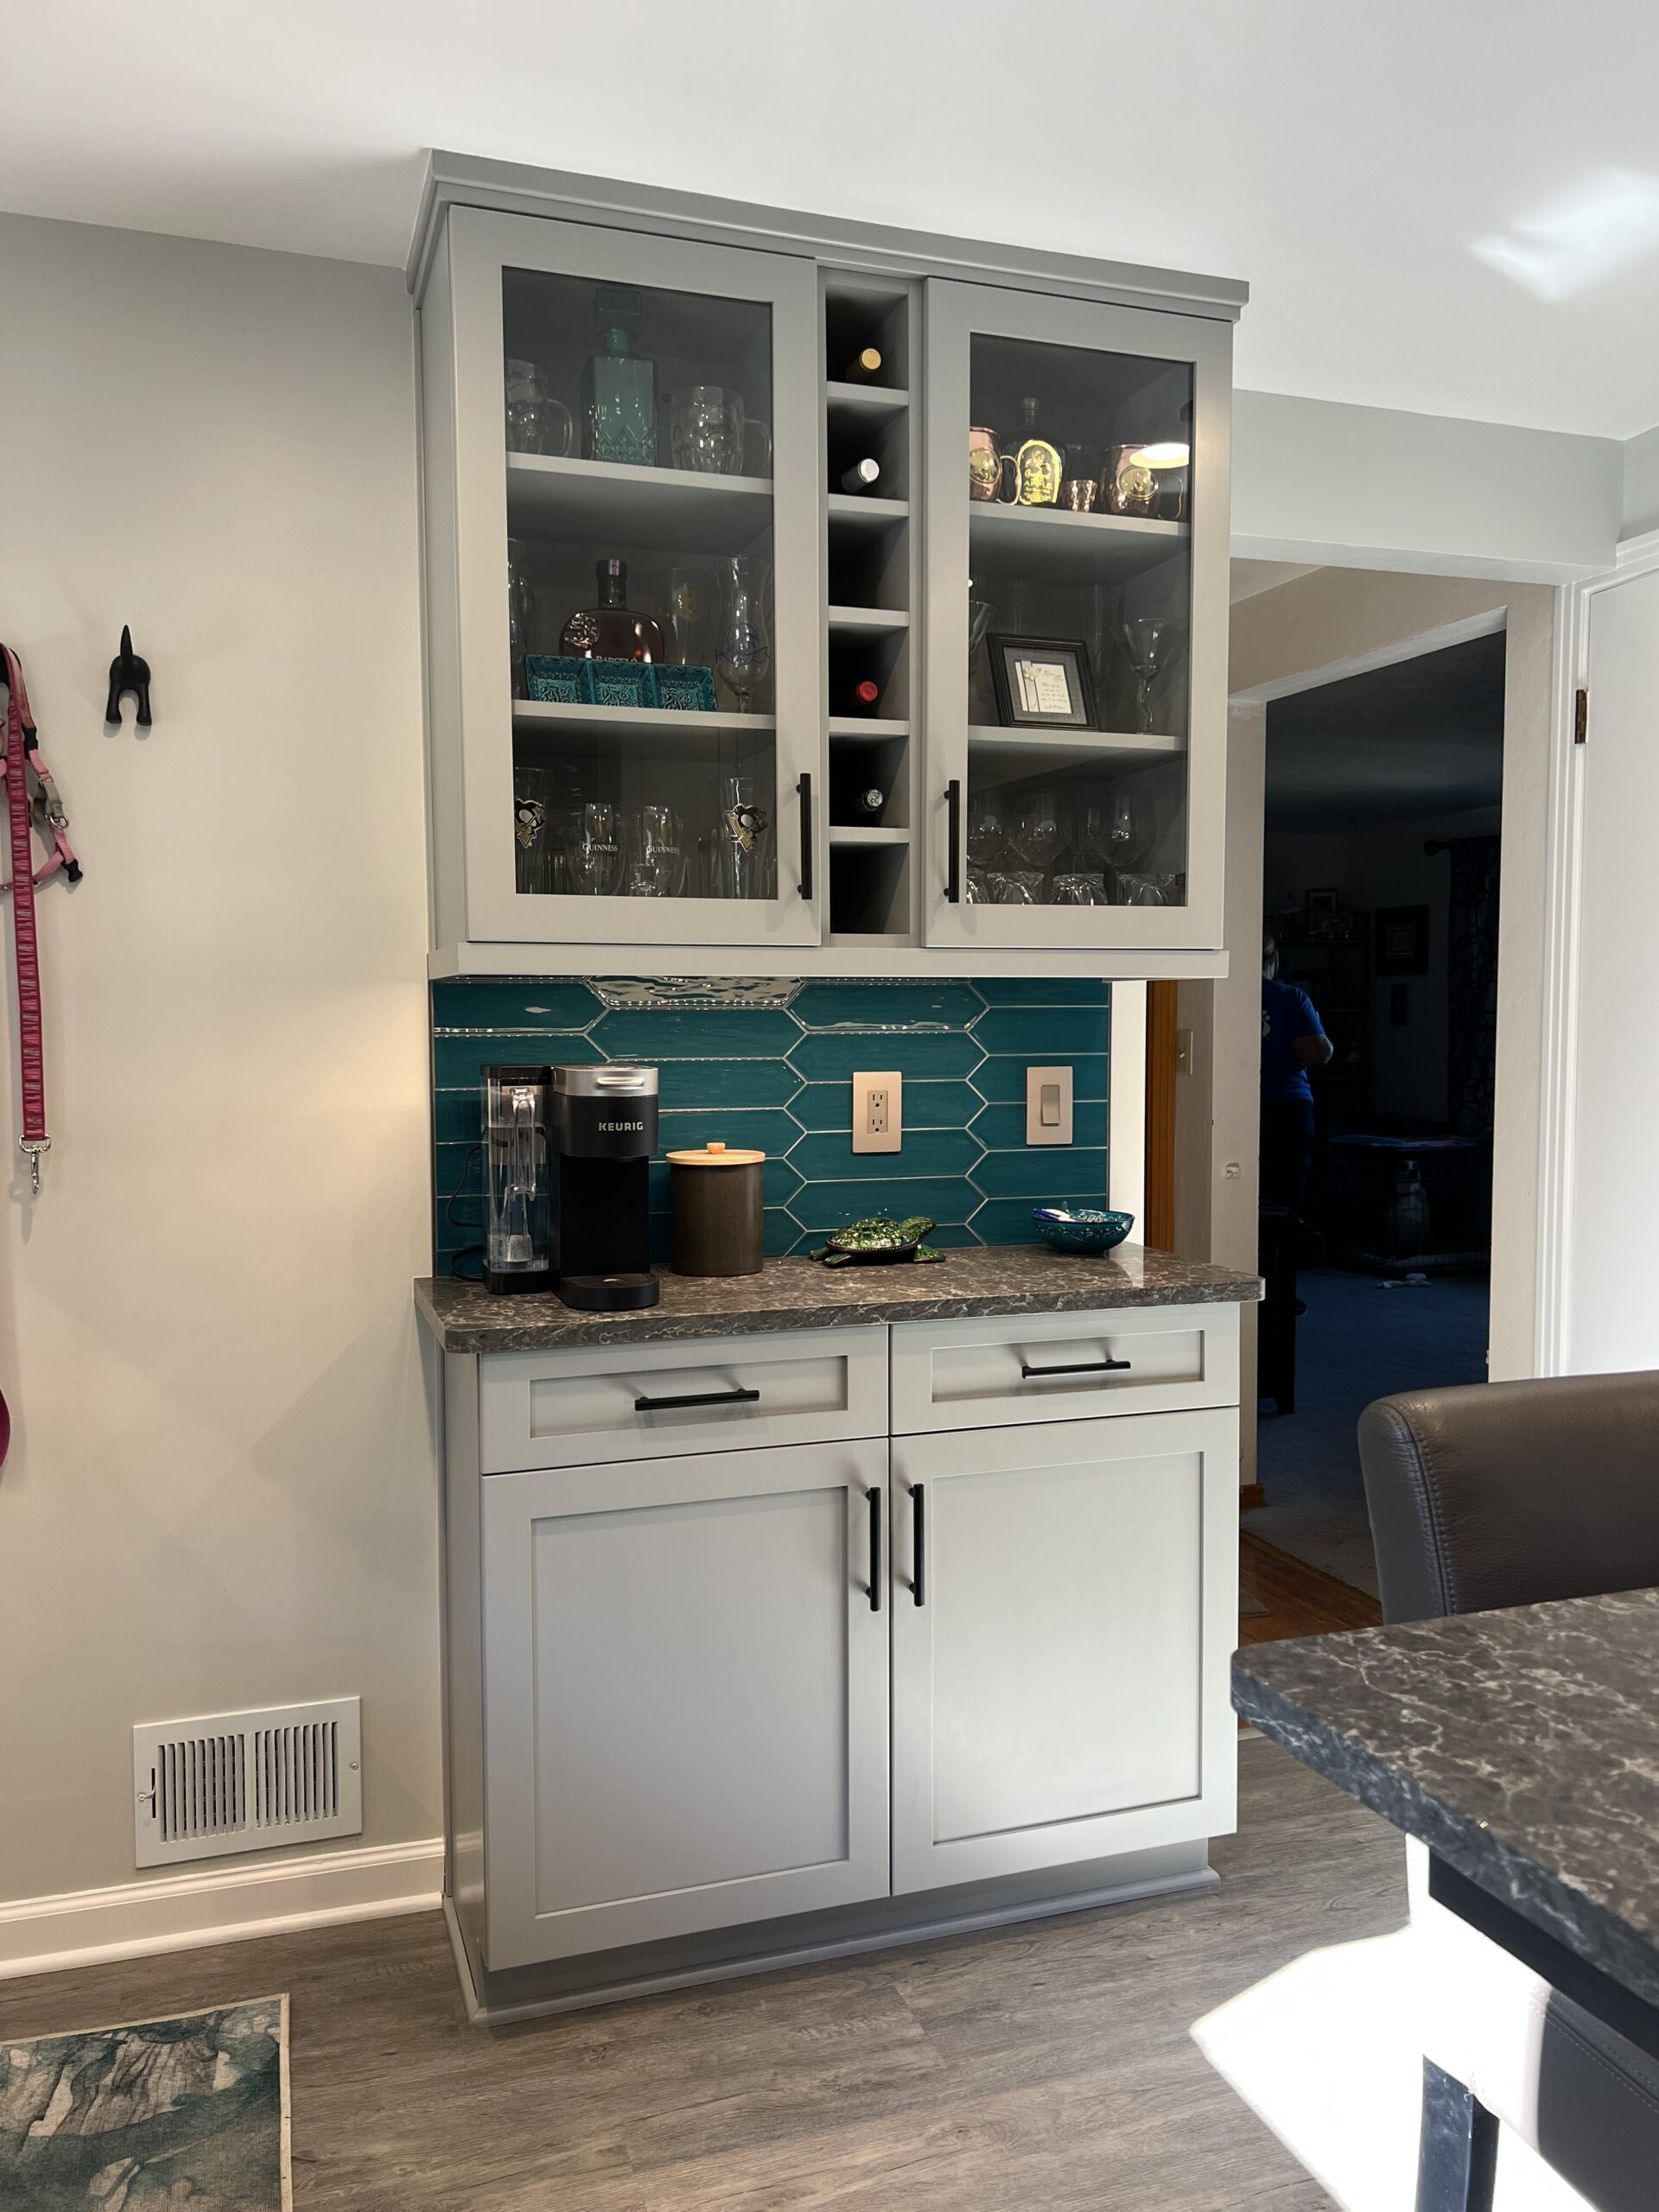 Classic kitchen remodel, blue teal tile, light grey closets with glass doors and wine bottle storage, butlers pantry